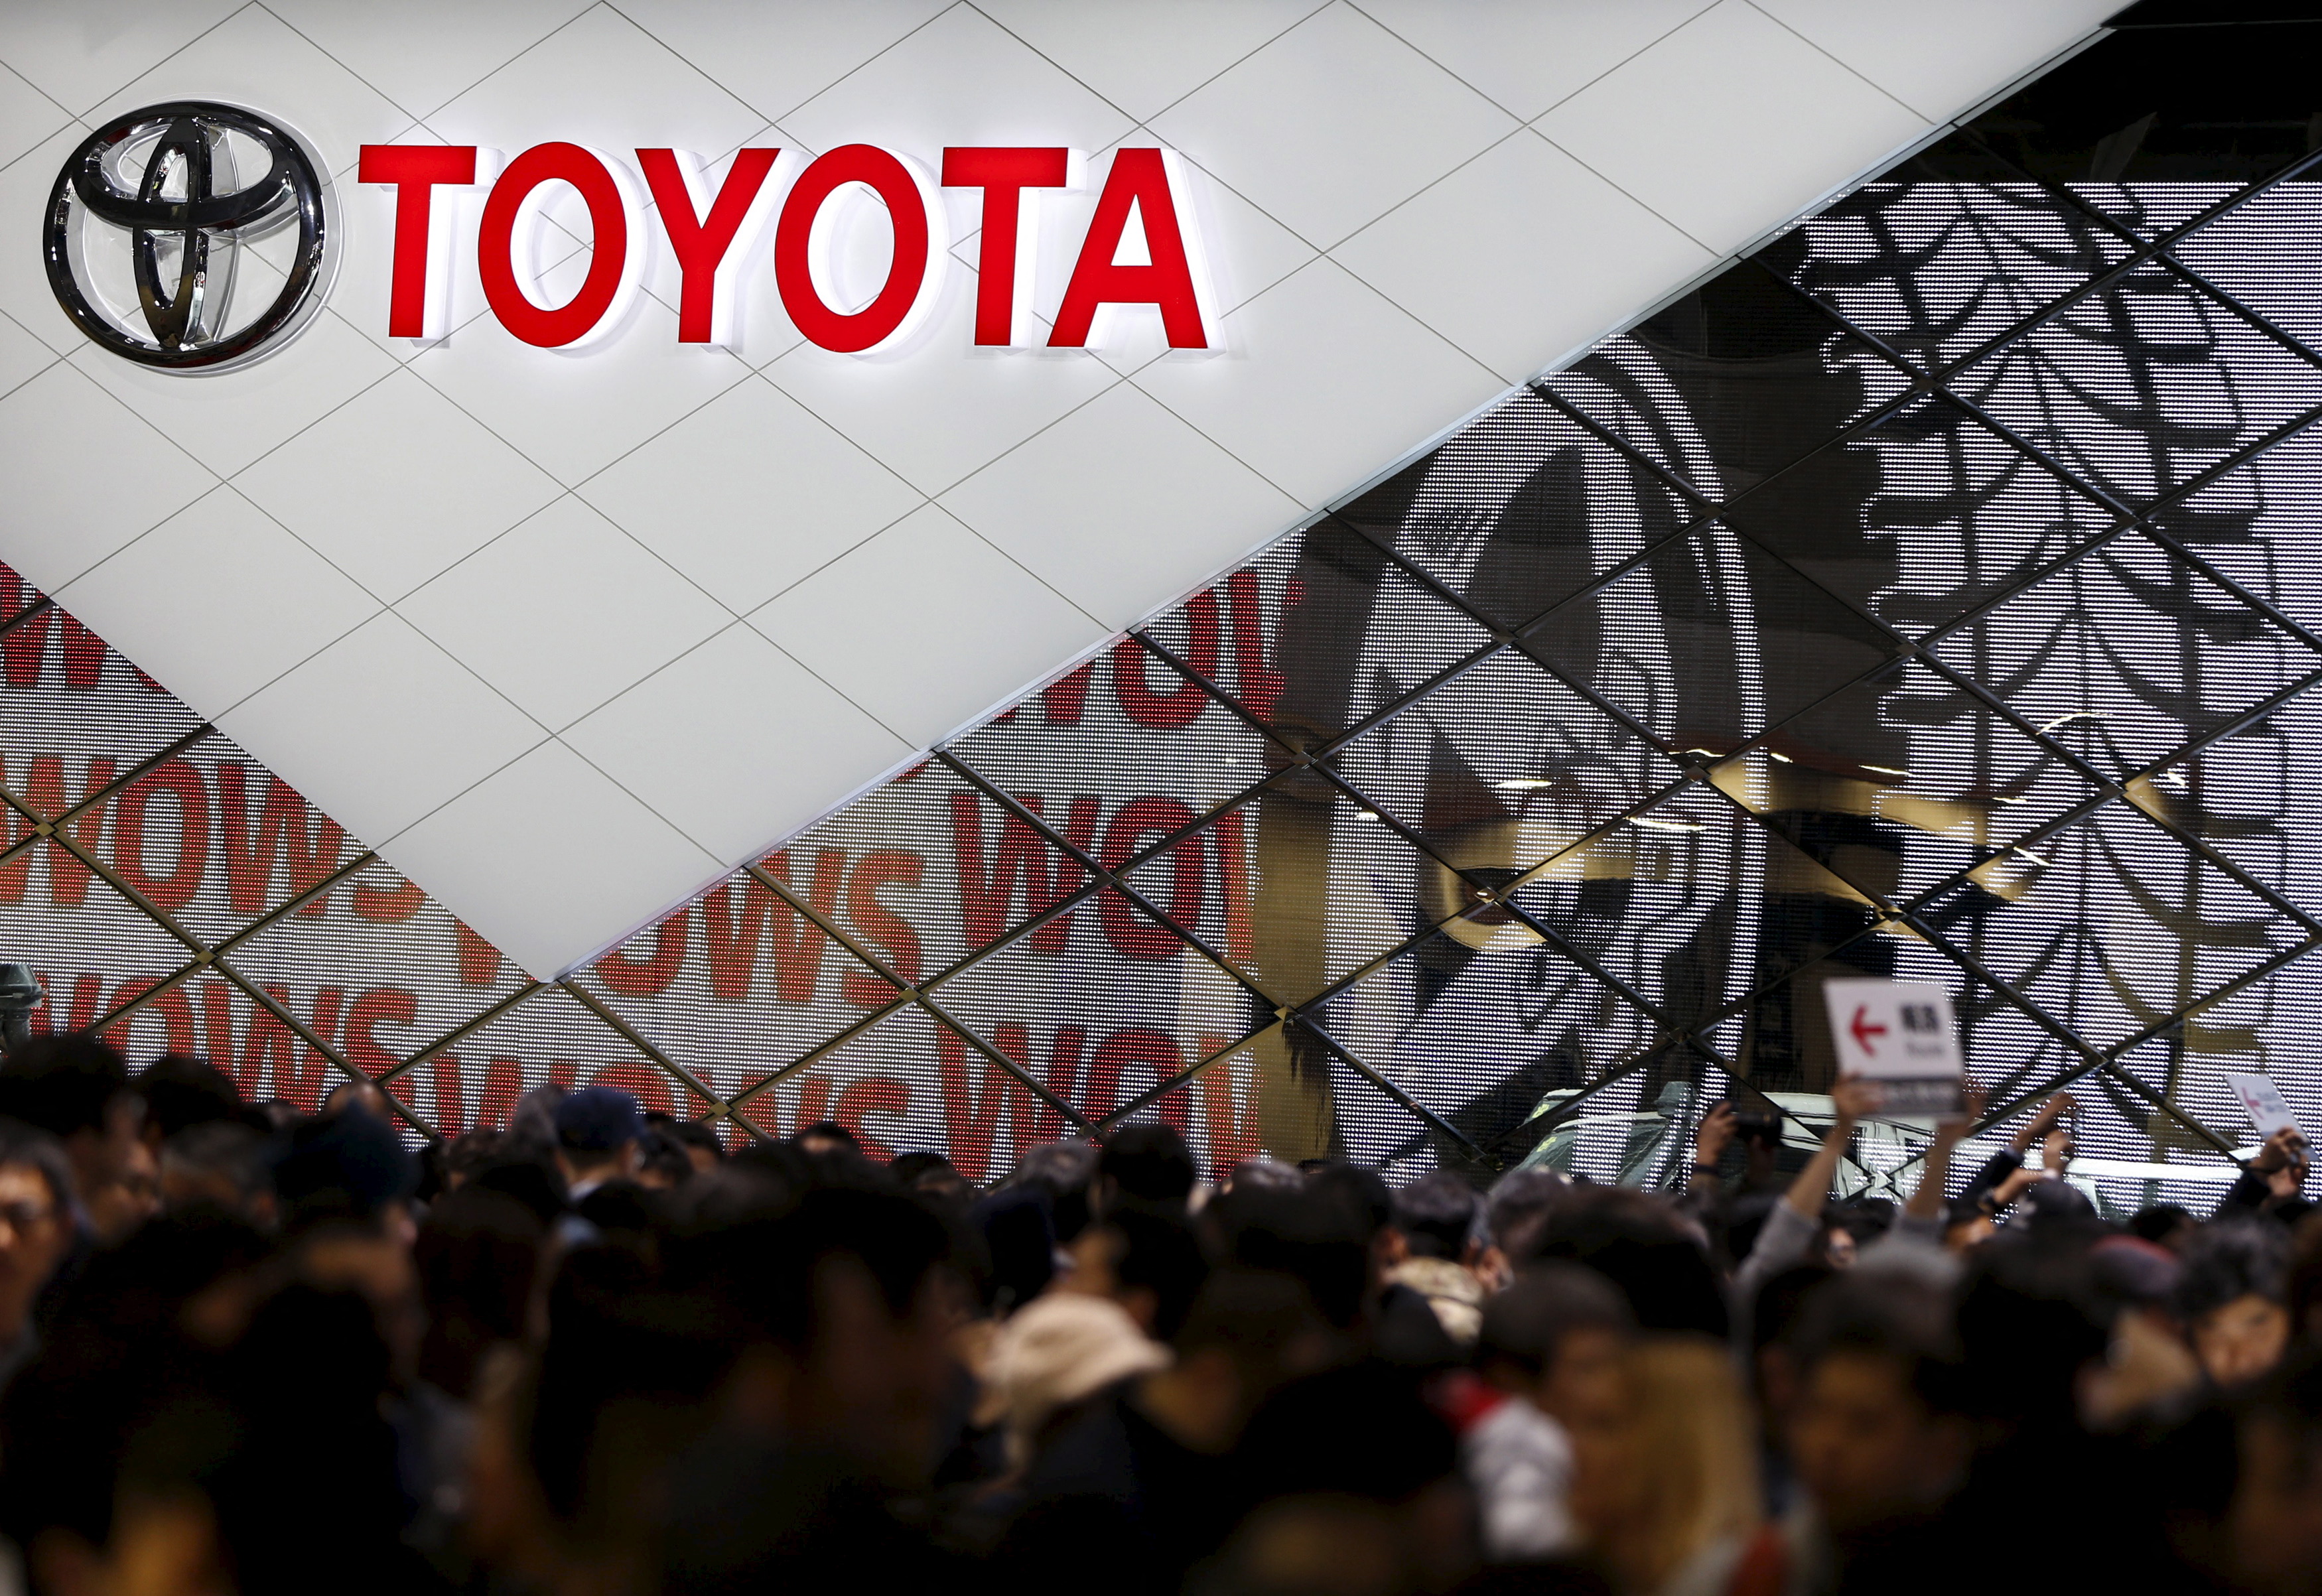 Visitors crowd Toyota Motor Corp's booth at the 44th Tokyo Motor Show in Tokyo, Japan